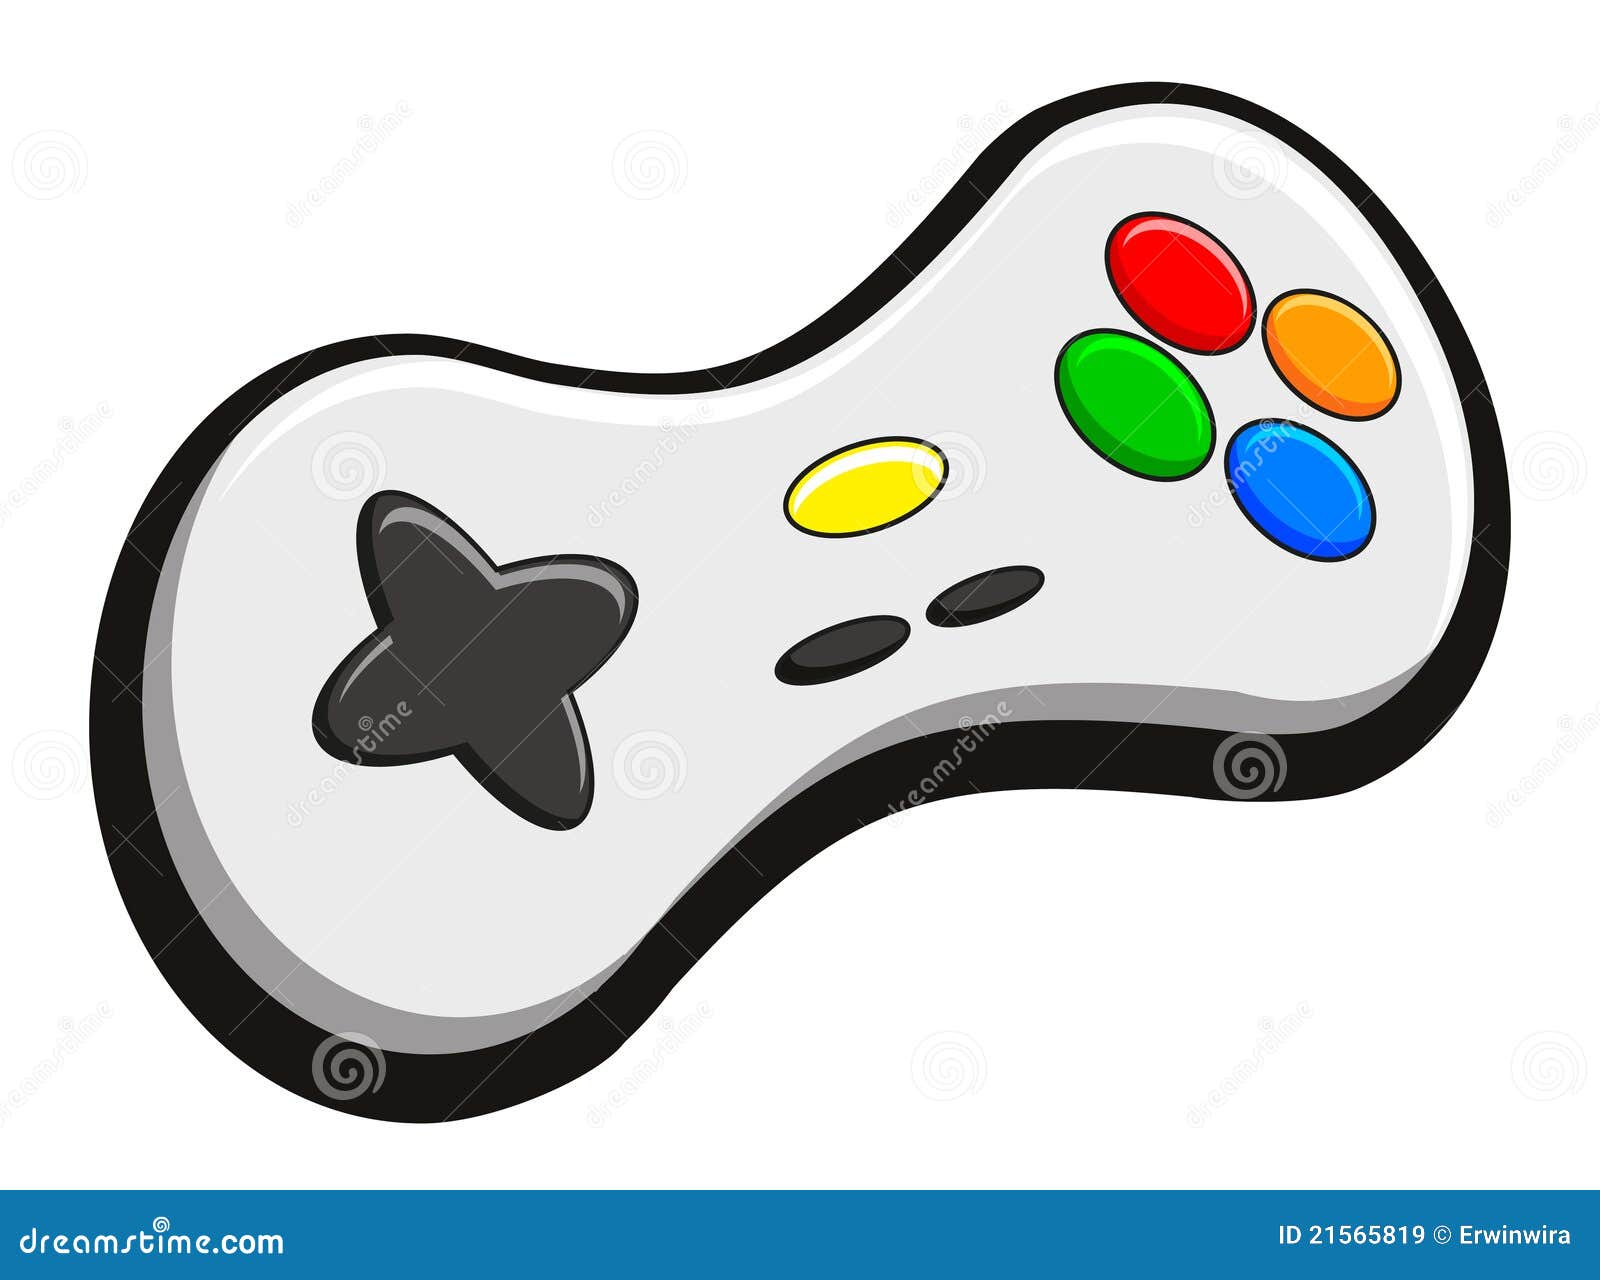 video game clipart images - photo #43